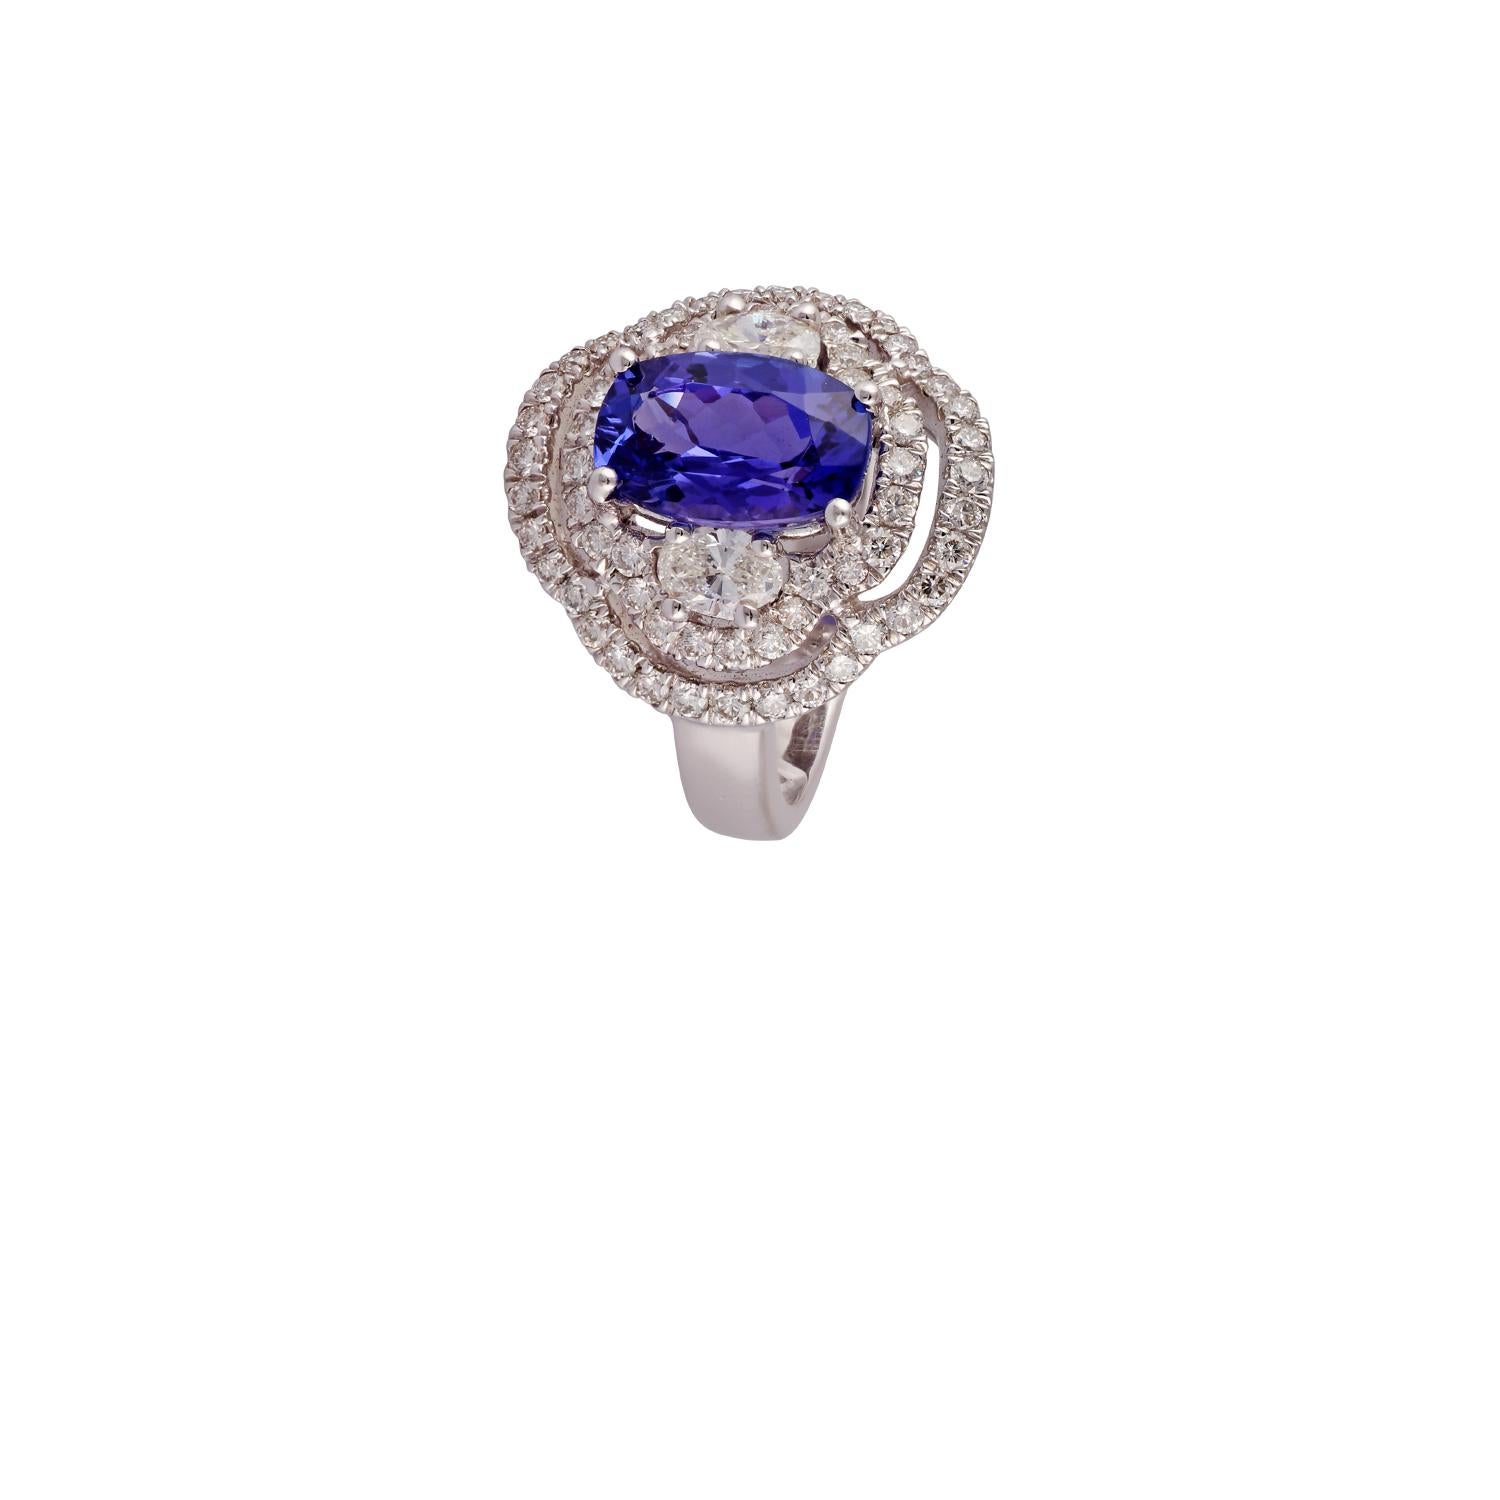 Mixed Cut 2.91 Carat Tanzanite & Diamond Ring Studded in 18K White Gold For Sale